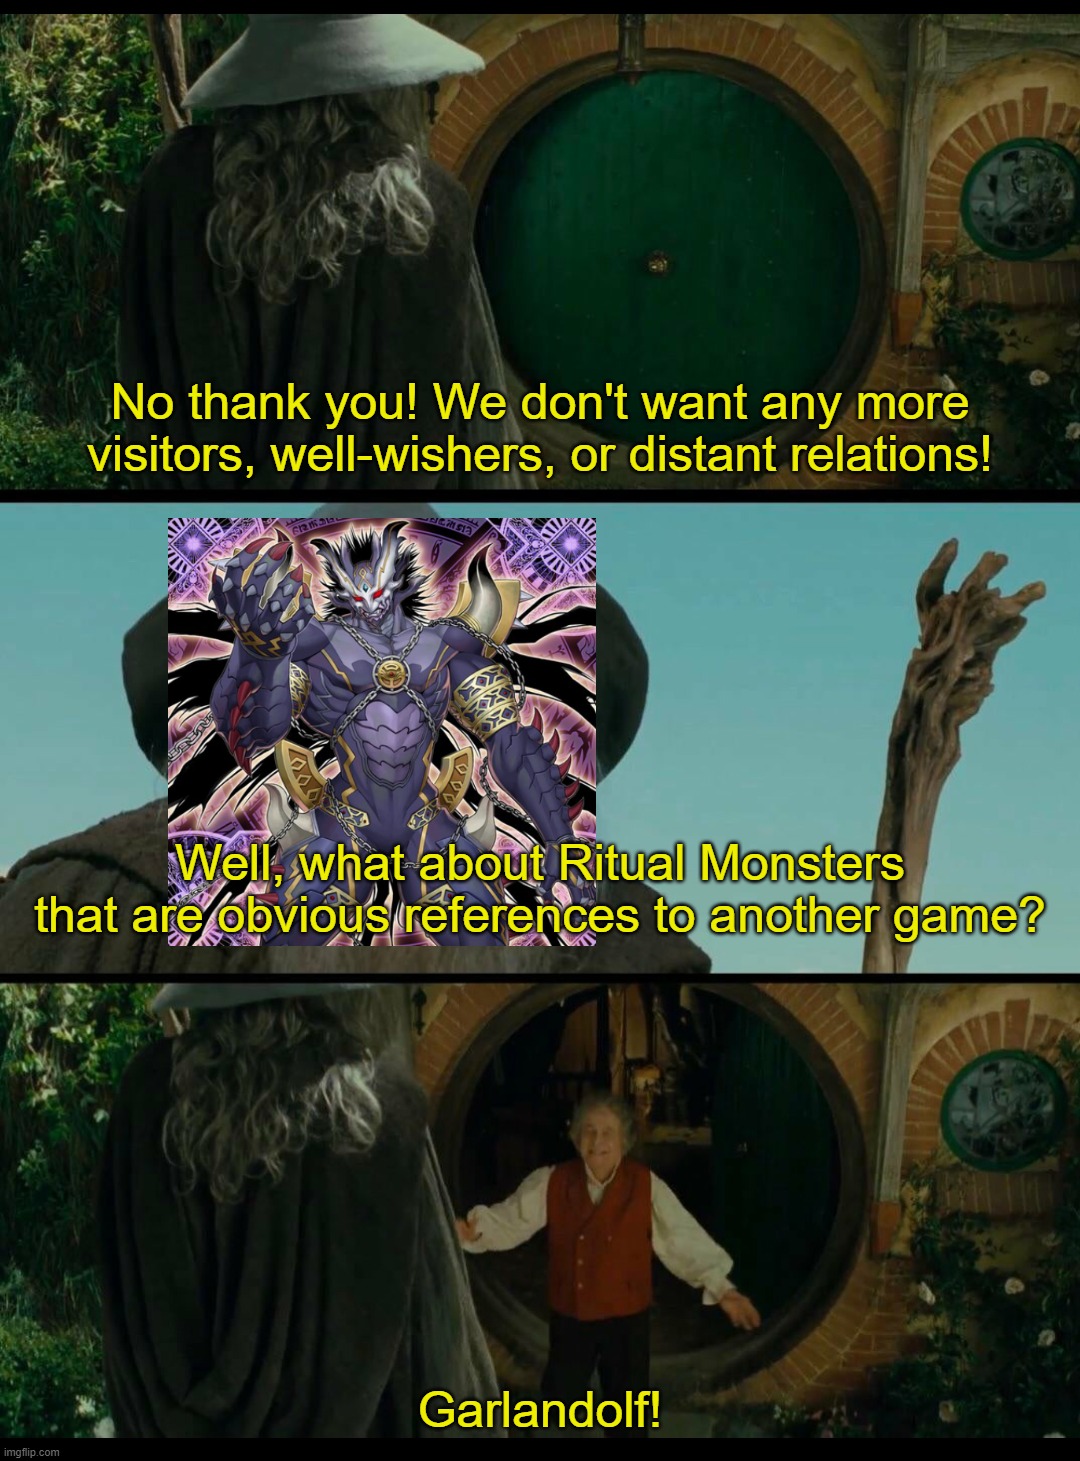 Gandalf | No thank you! We don't want any more visitors, well-wishers, or distant relations! Well, what about Ritual Monsters that are obvious references to another game? Garlandolf! | image tagged in gandalf | made w/ Imgflip meme maker